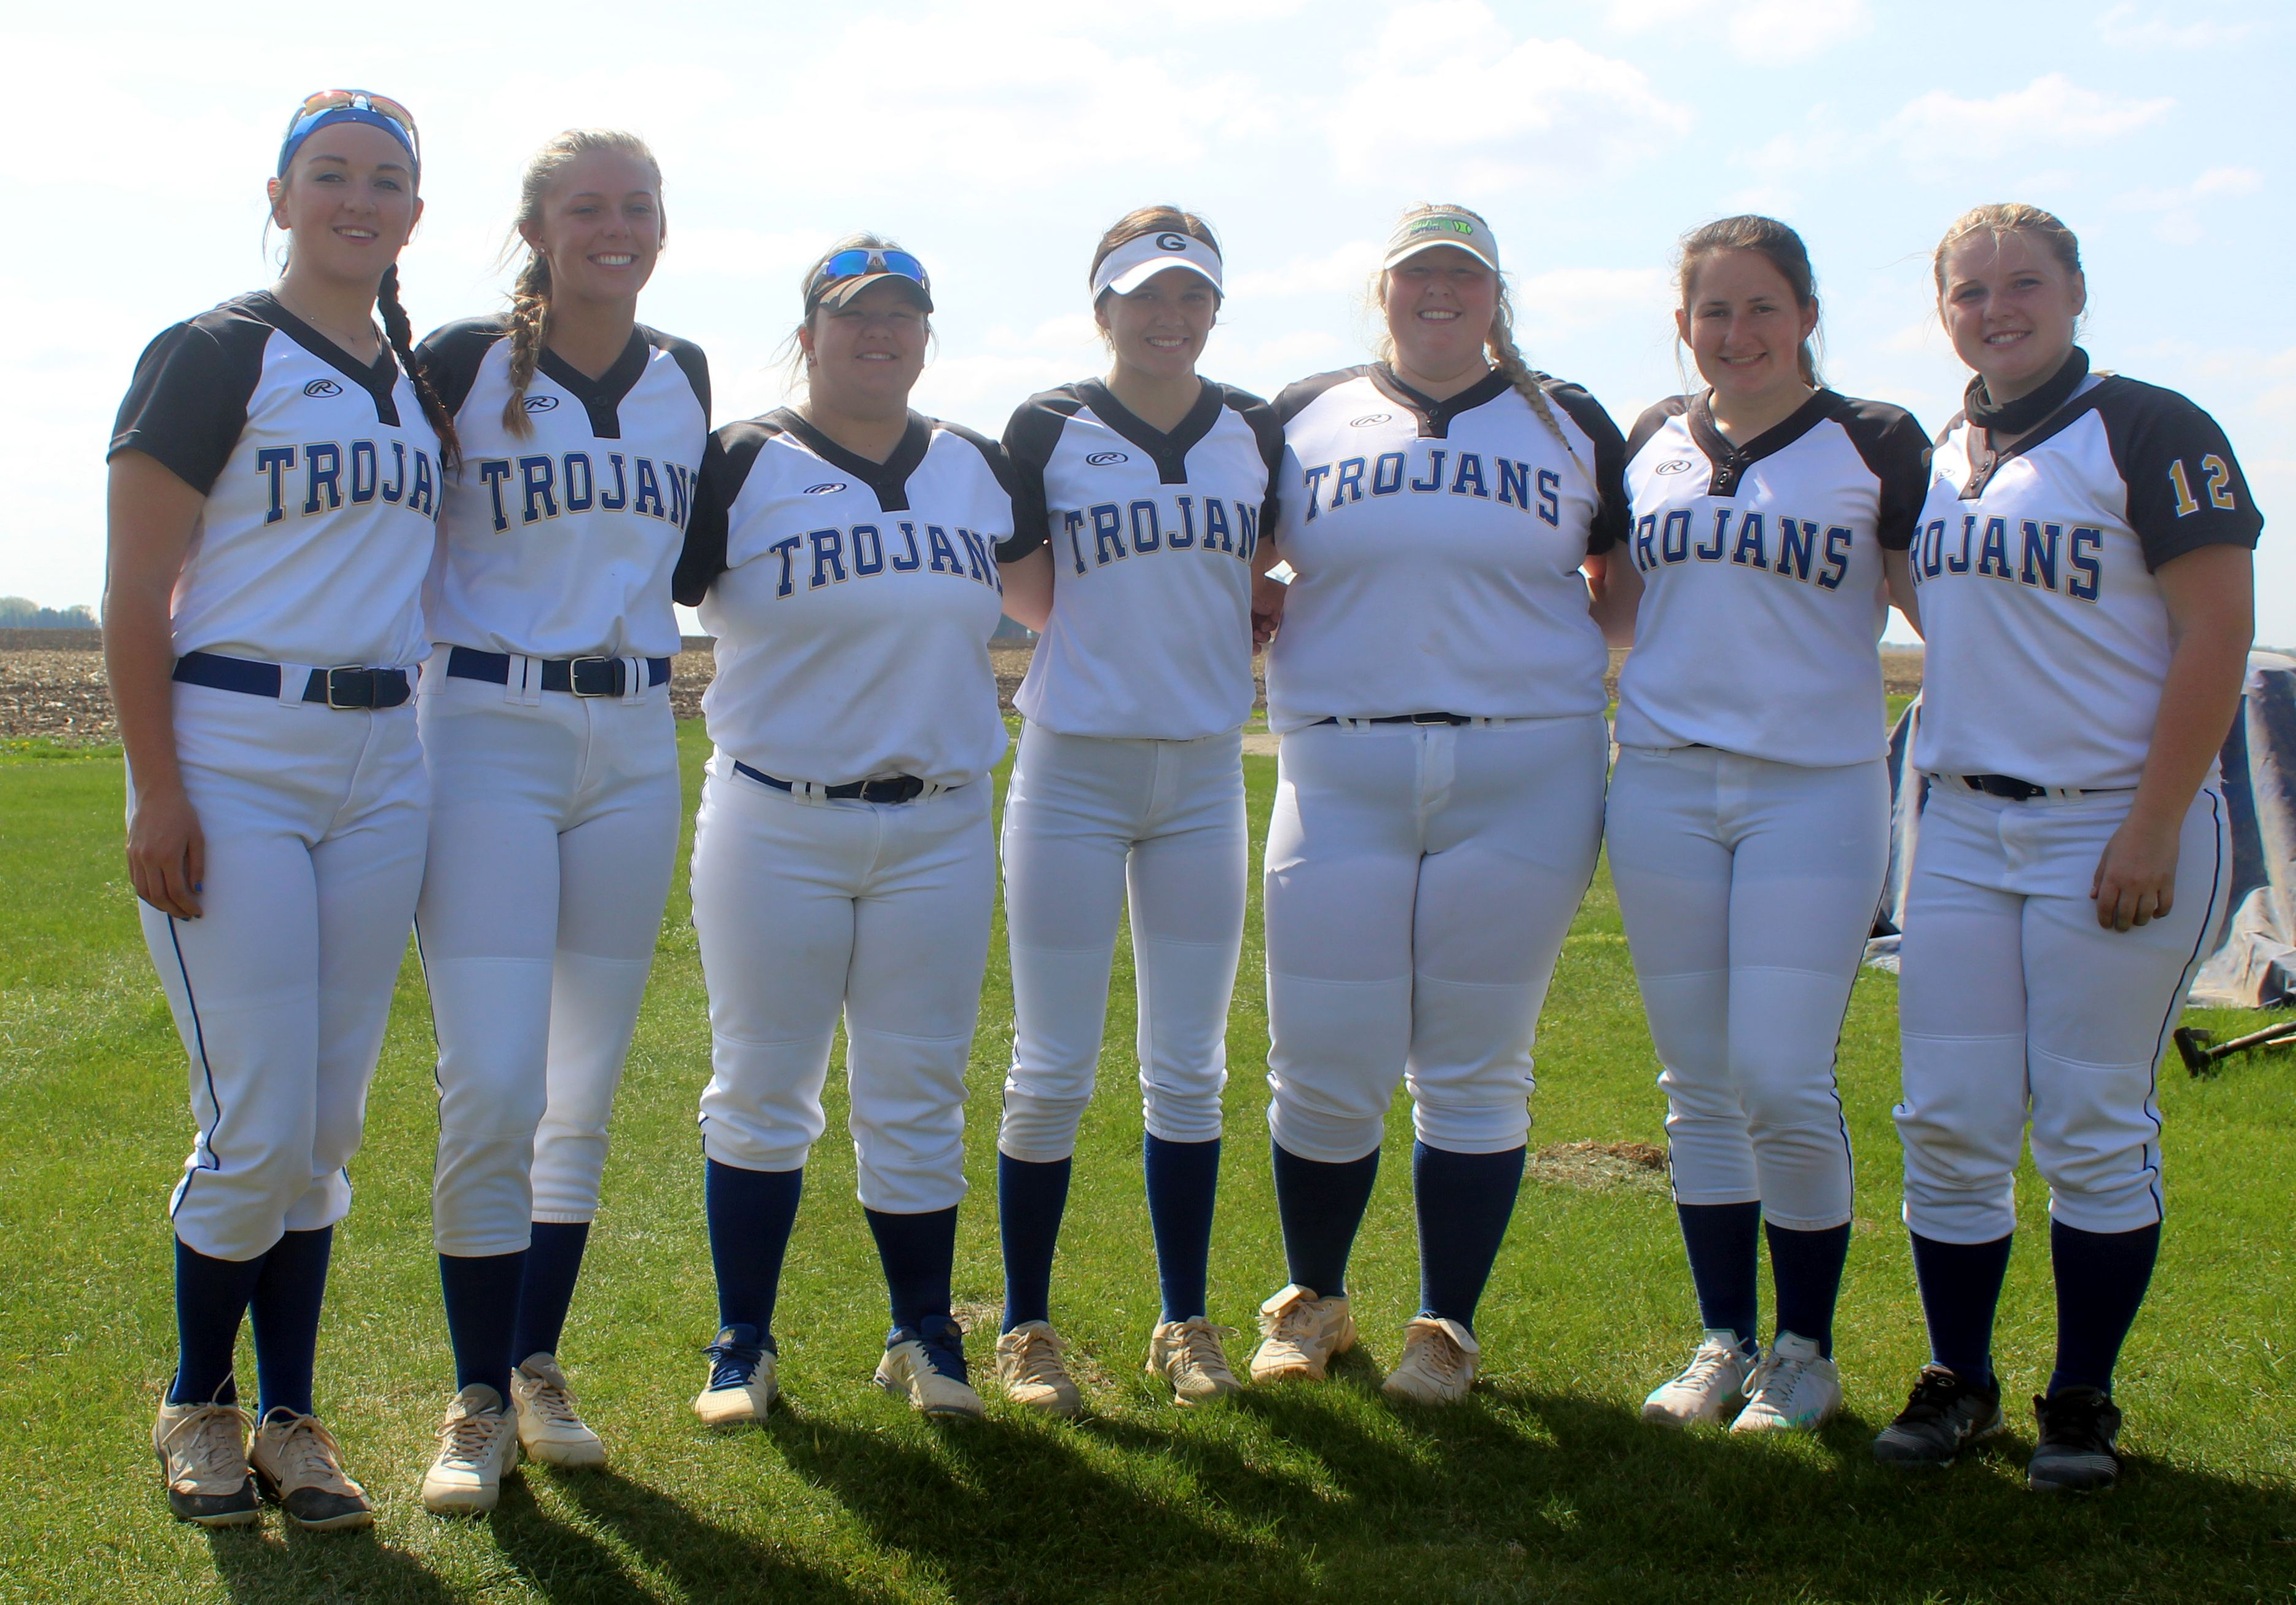 The NIACC sophomores were honored before Sunday's doubleheader against Iowa Western.